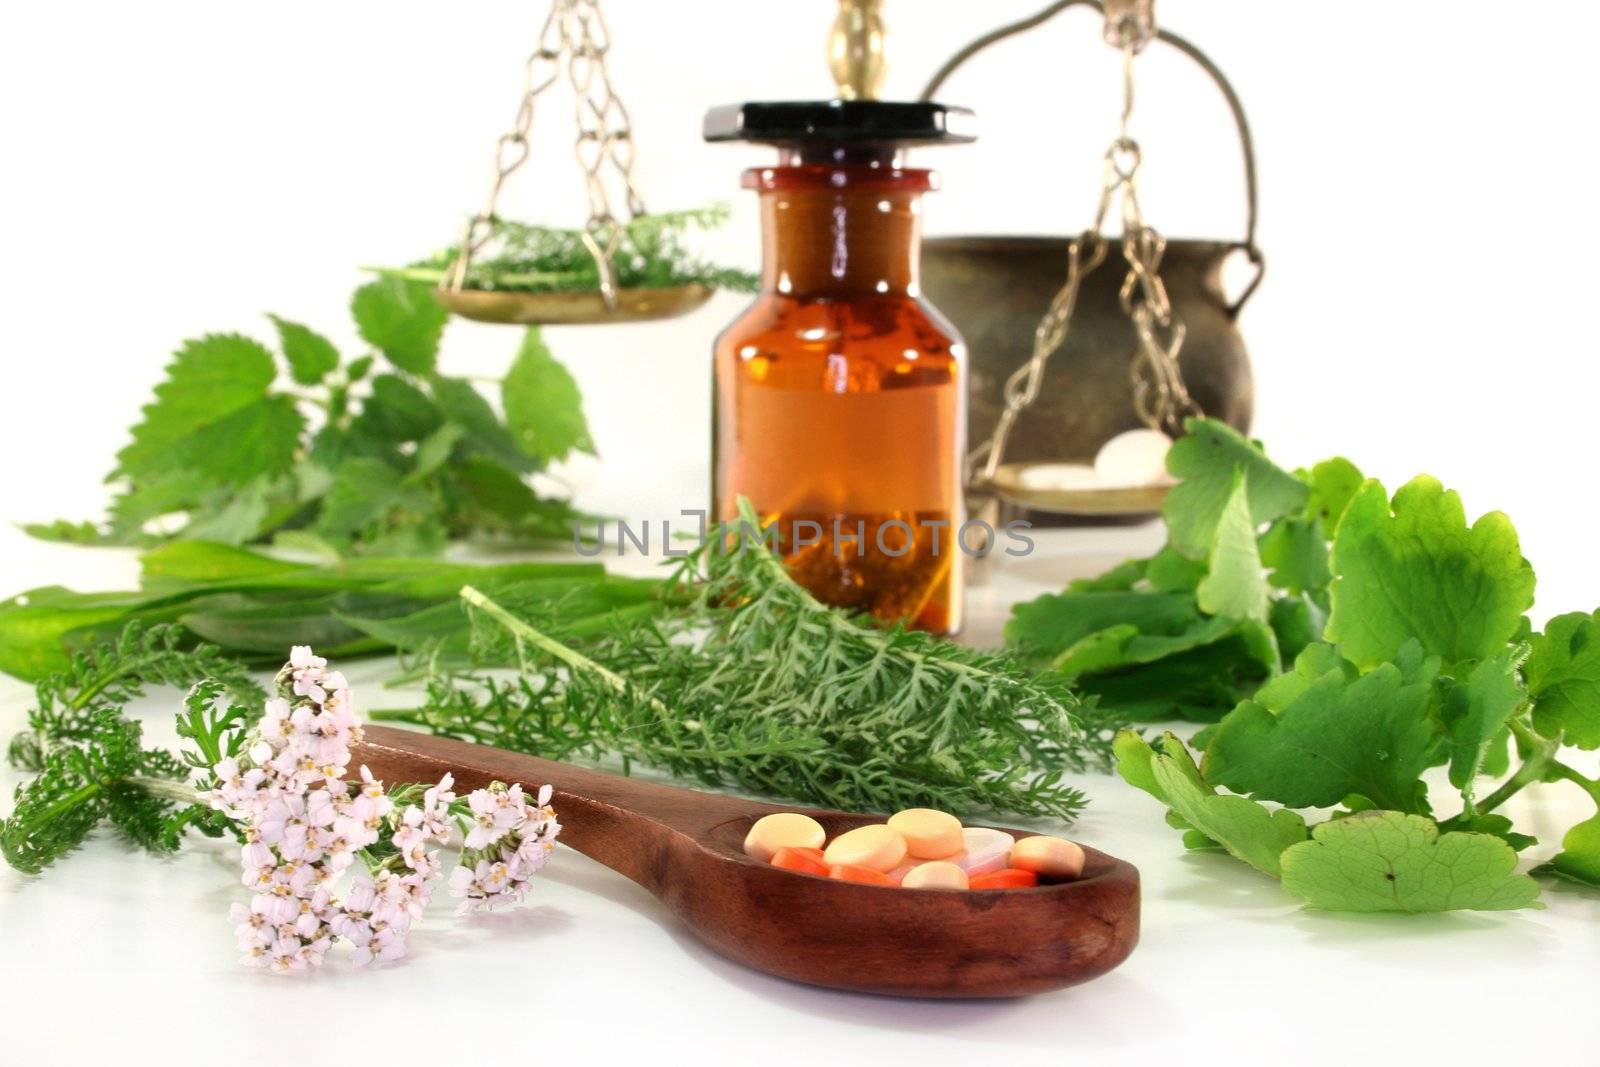 fresh medicinal herbs and spices on a white background